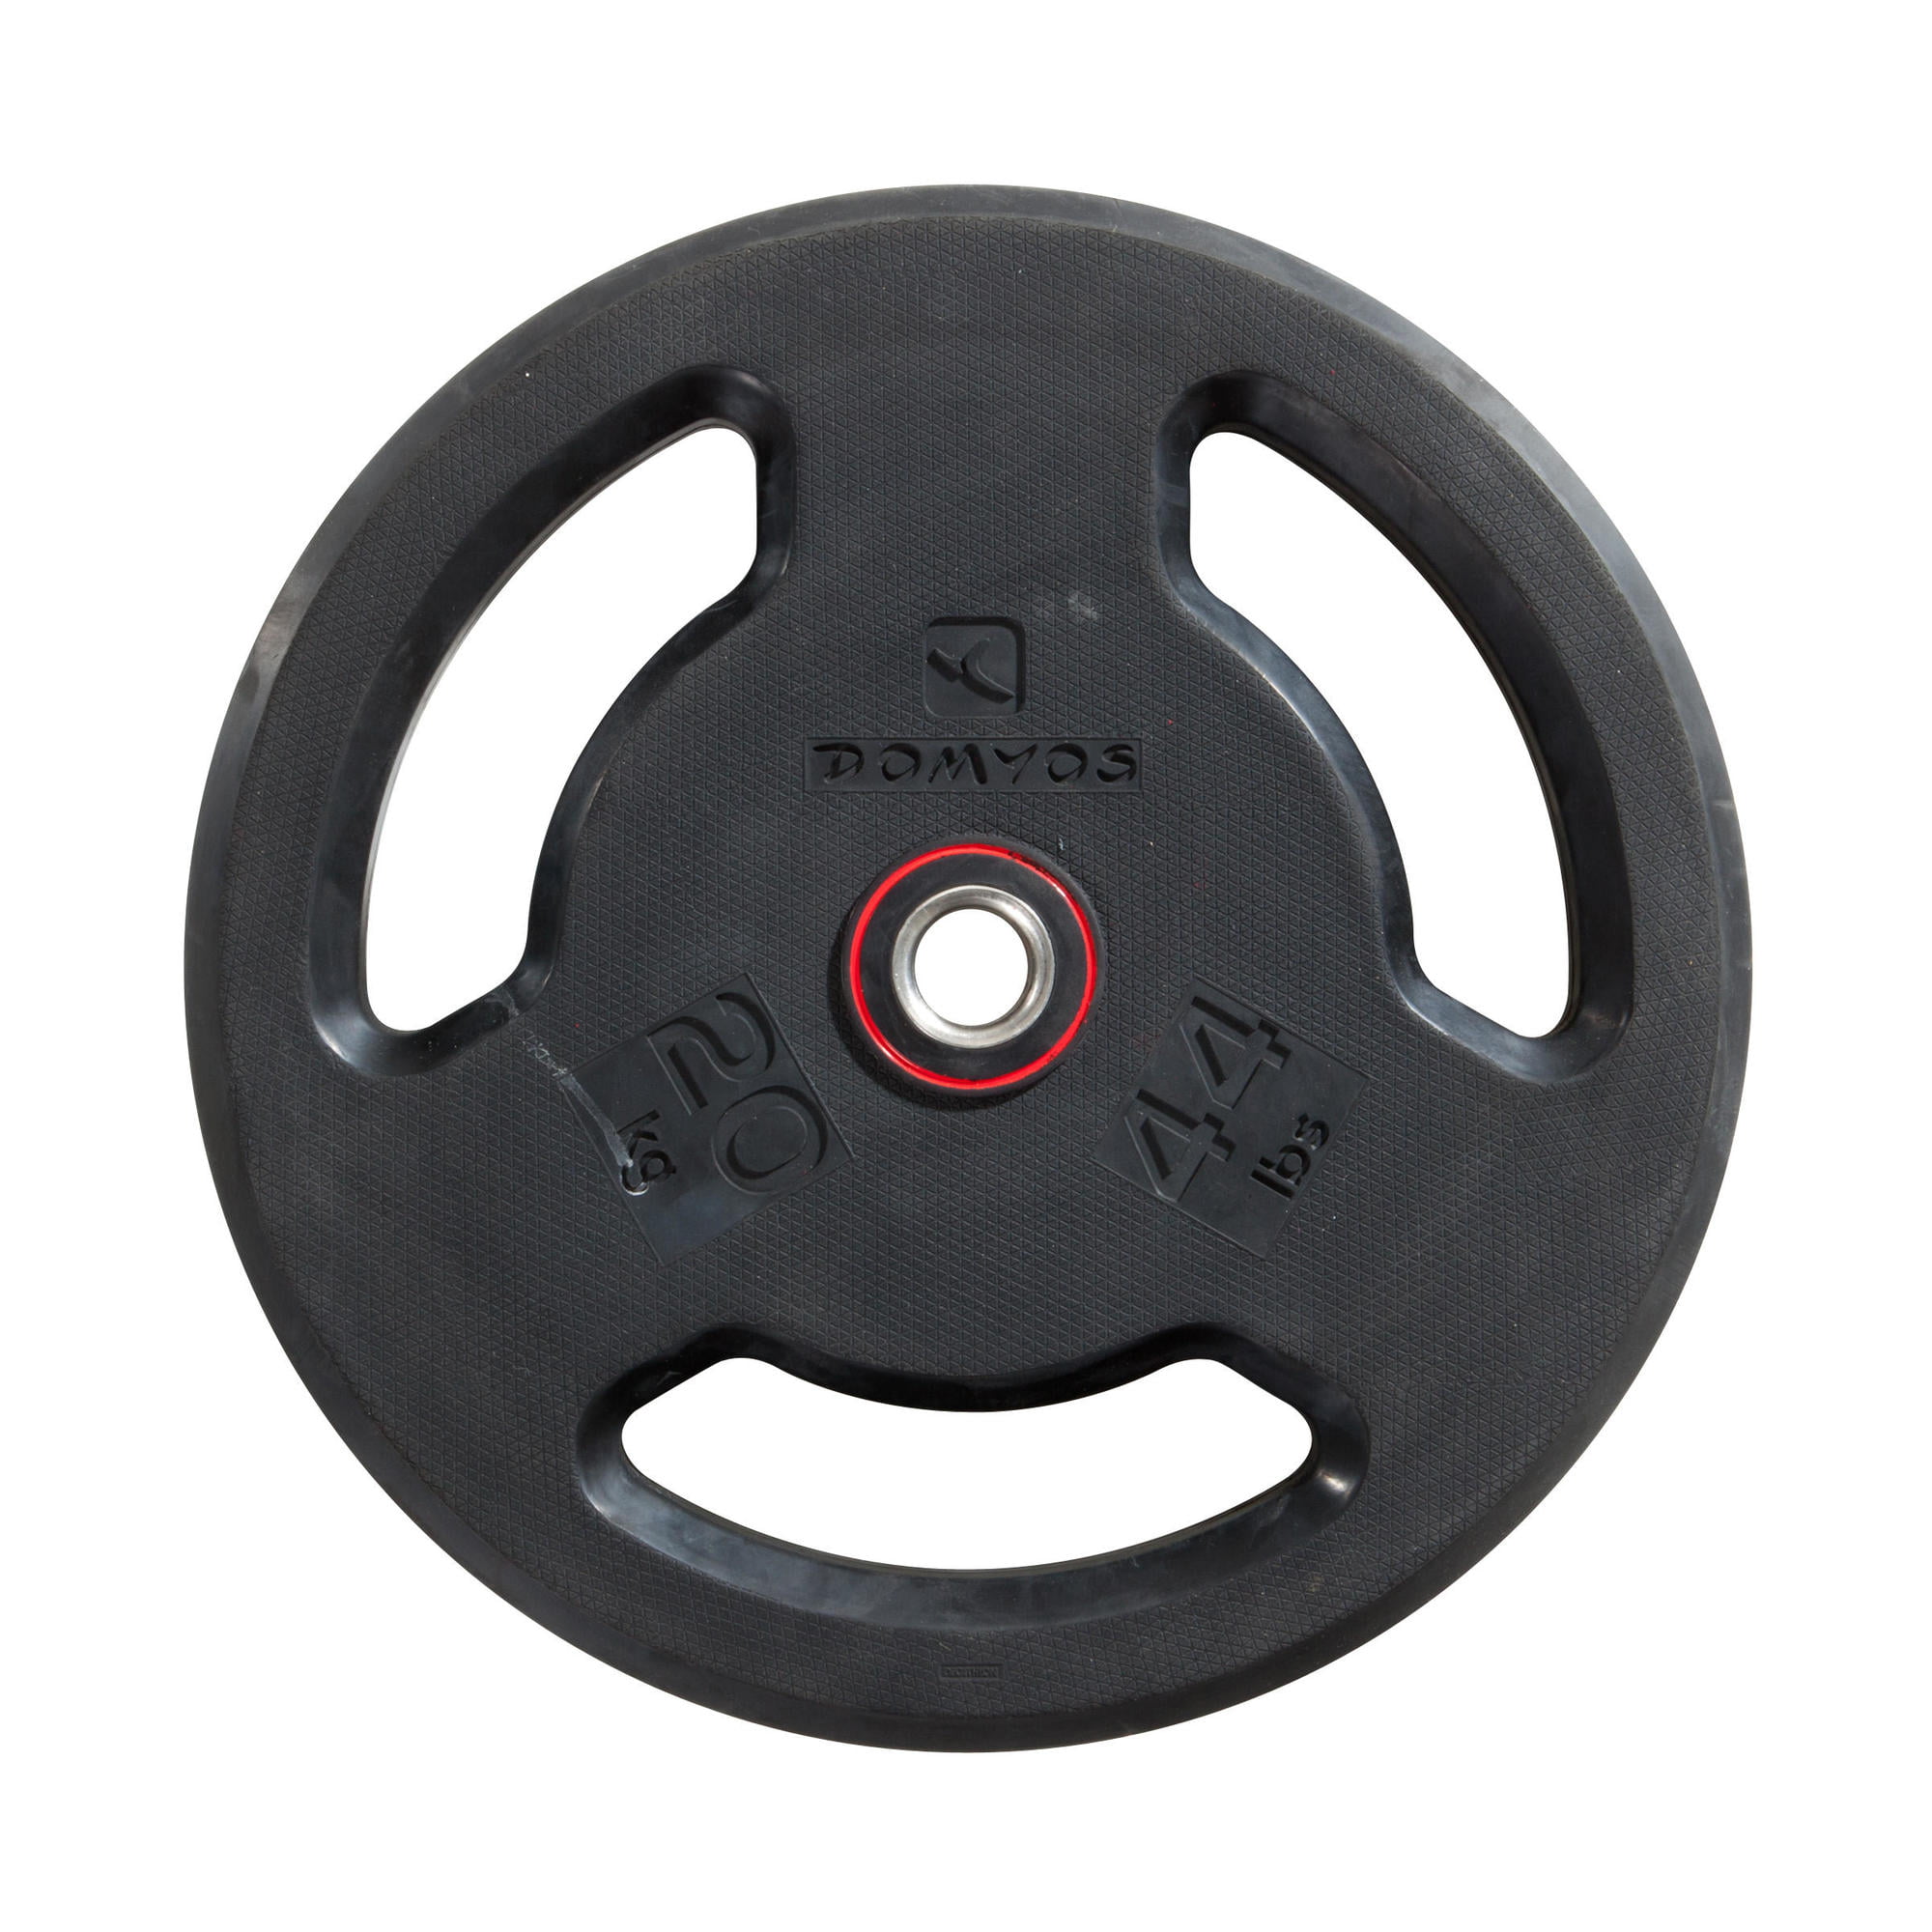 Rubber Disc pair for Olympic bar 2" protect weight plates INTERNATIONAL SHIPPING